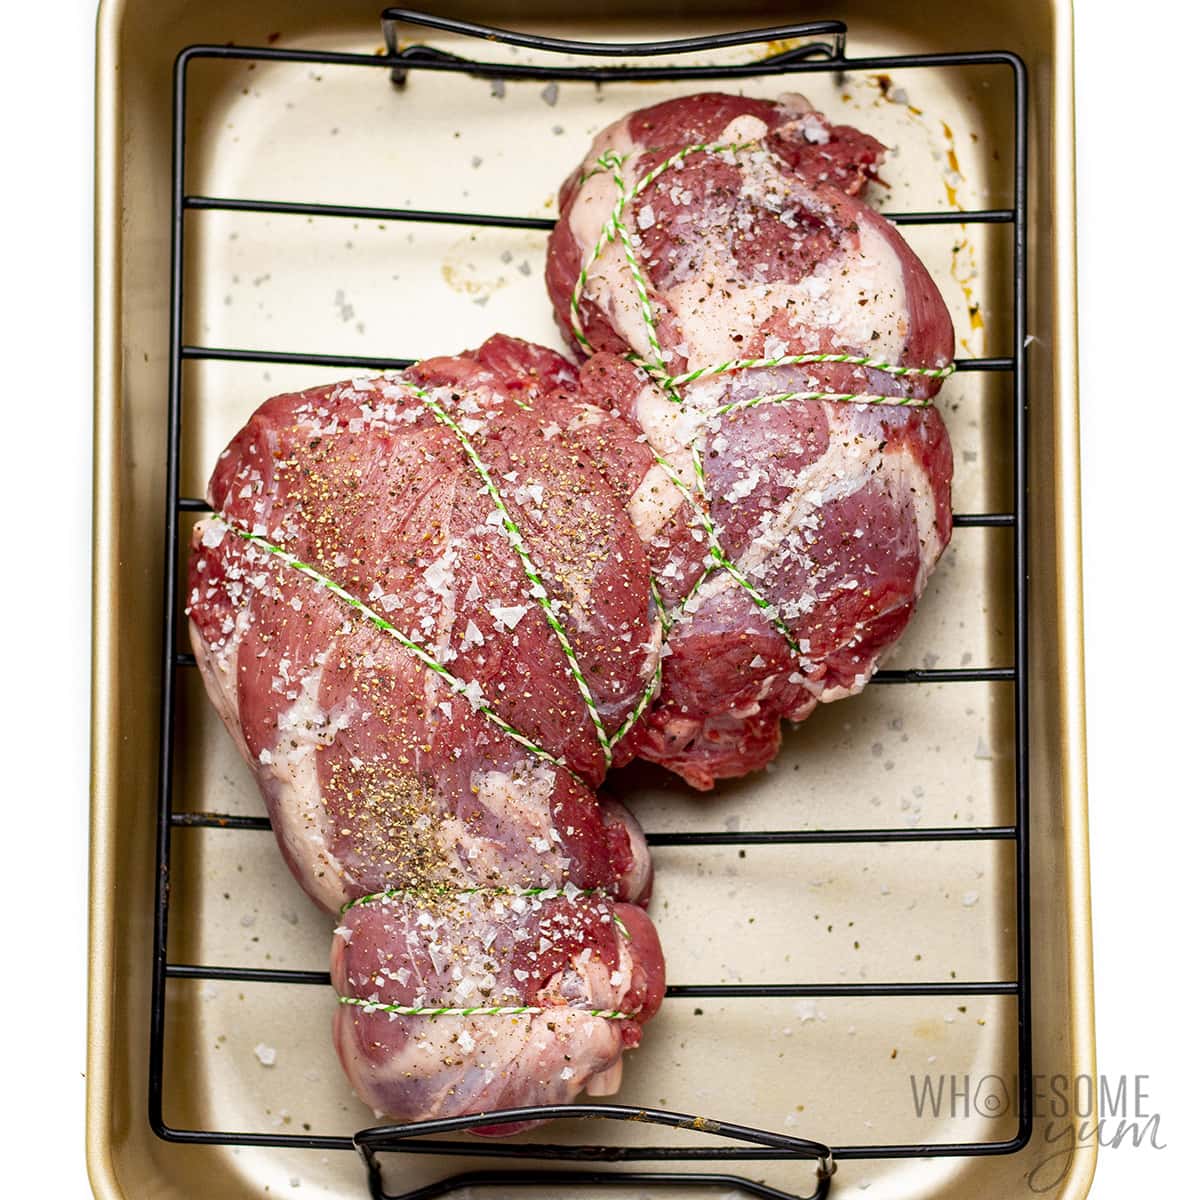 Tied up lamb in a roasting pan.